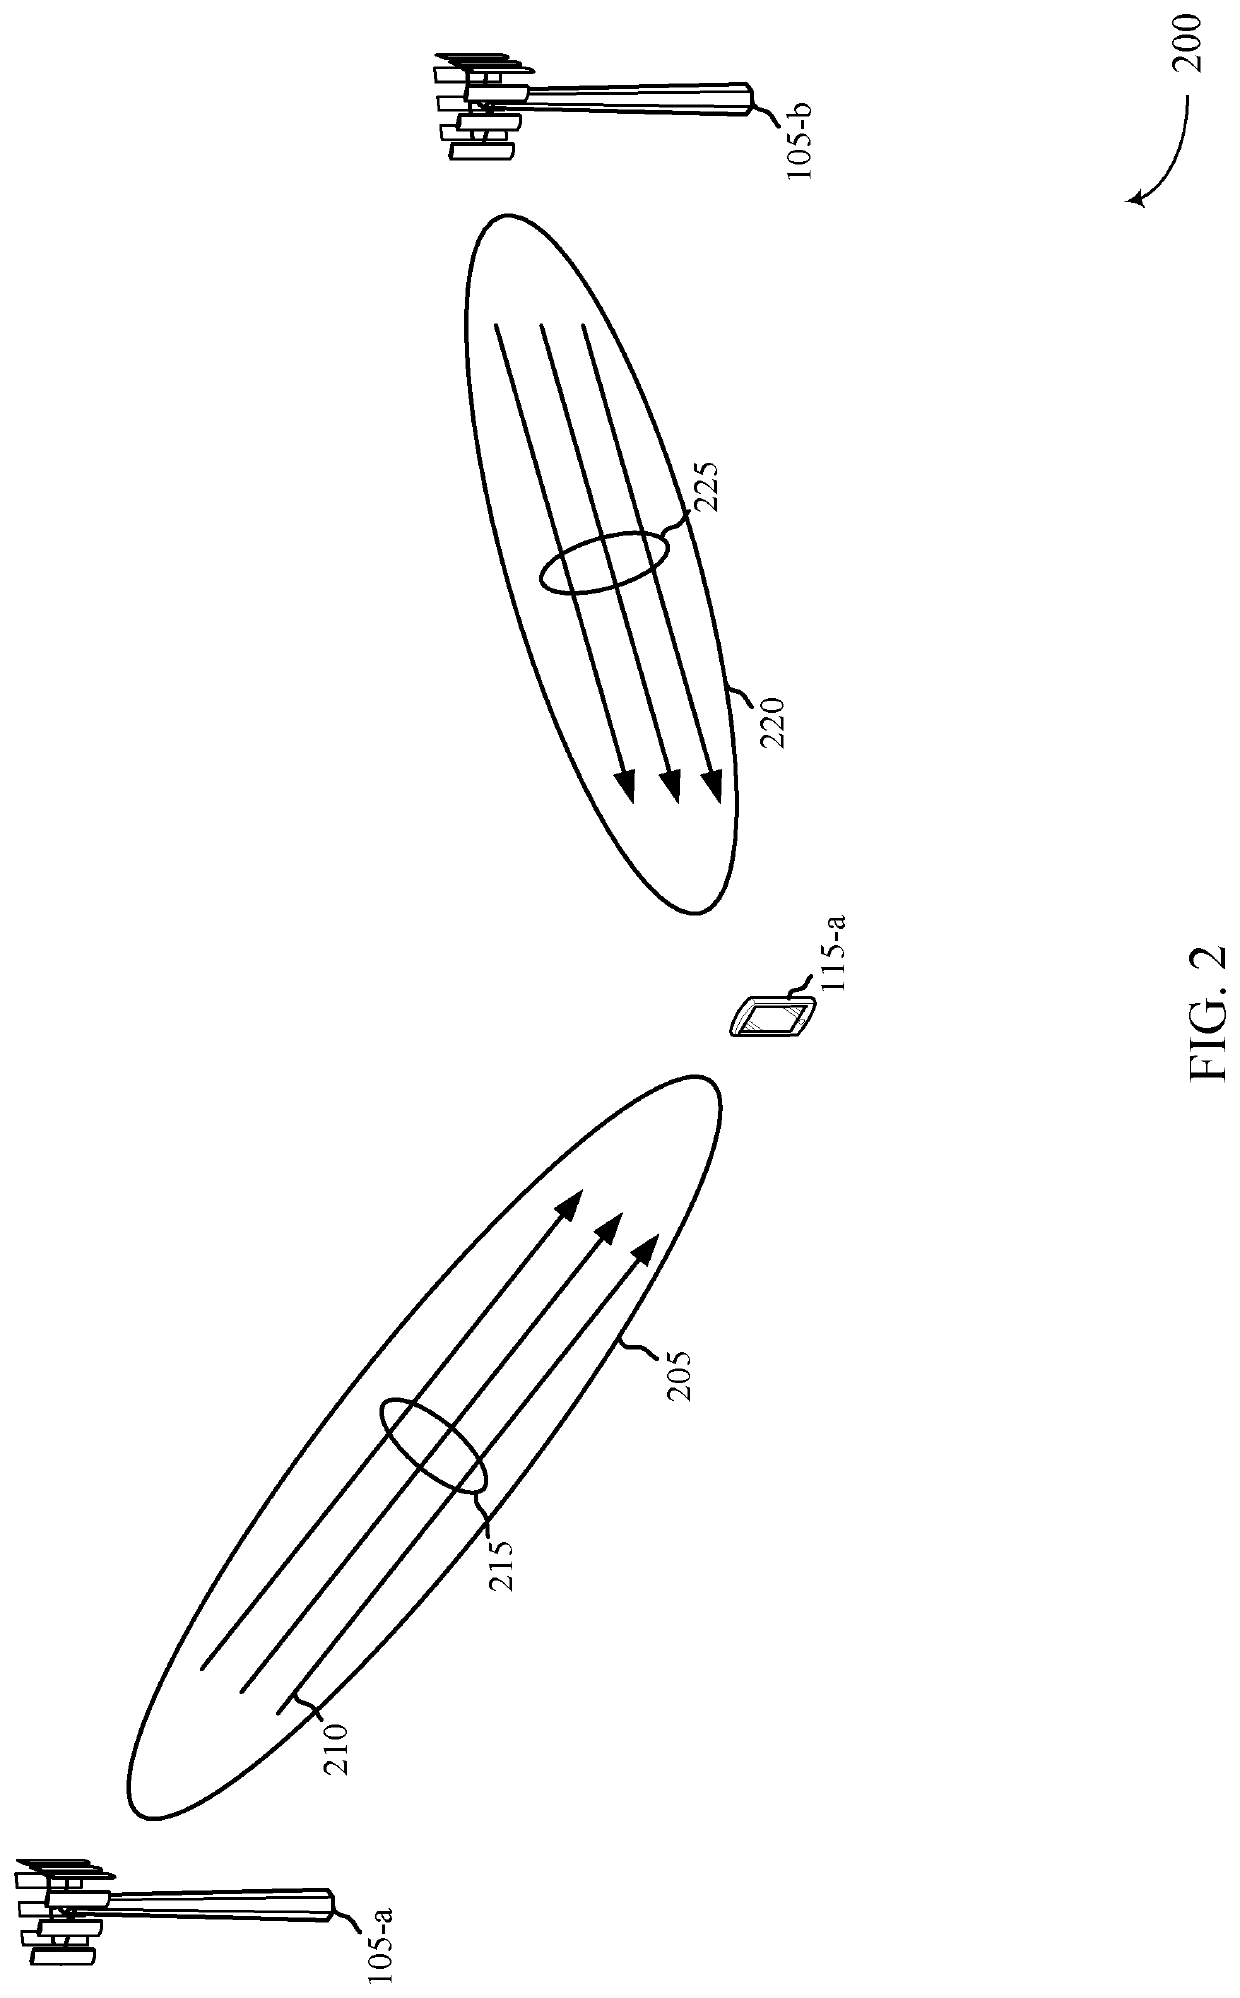 Beam reporting and scheduling in multicarrier beamformed communications